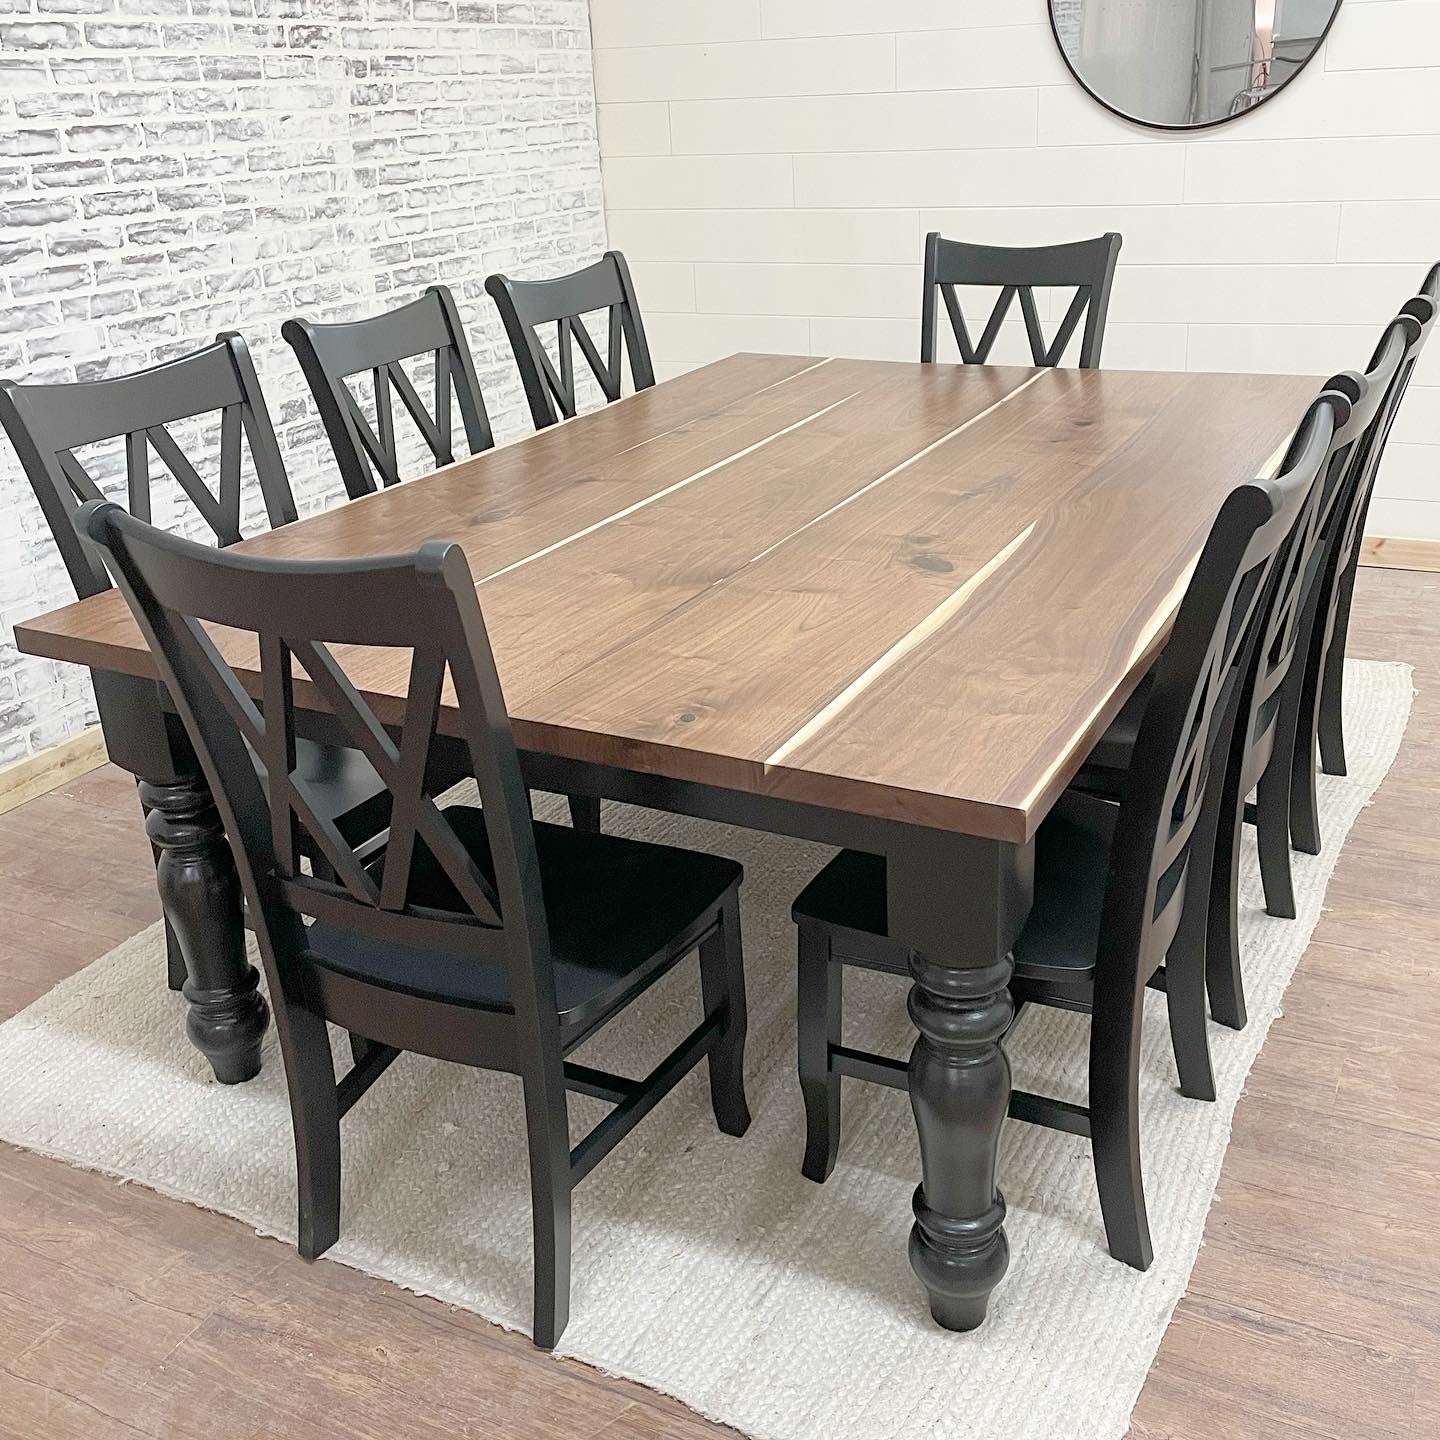 Pictured with a 8' L x 48" W Walnut top with a Natural finish and a Black painted base. Pictured with 8 Double Cross Back Chairs.